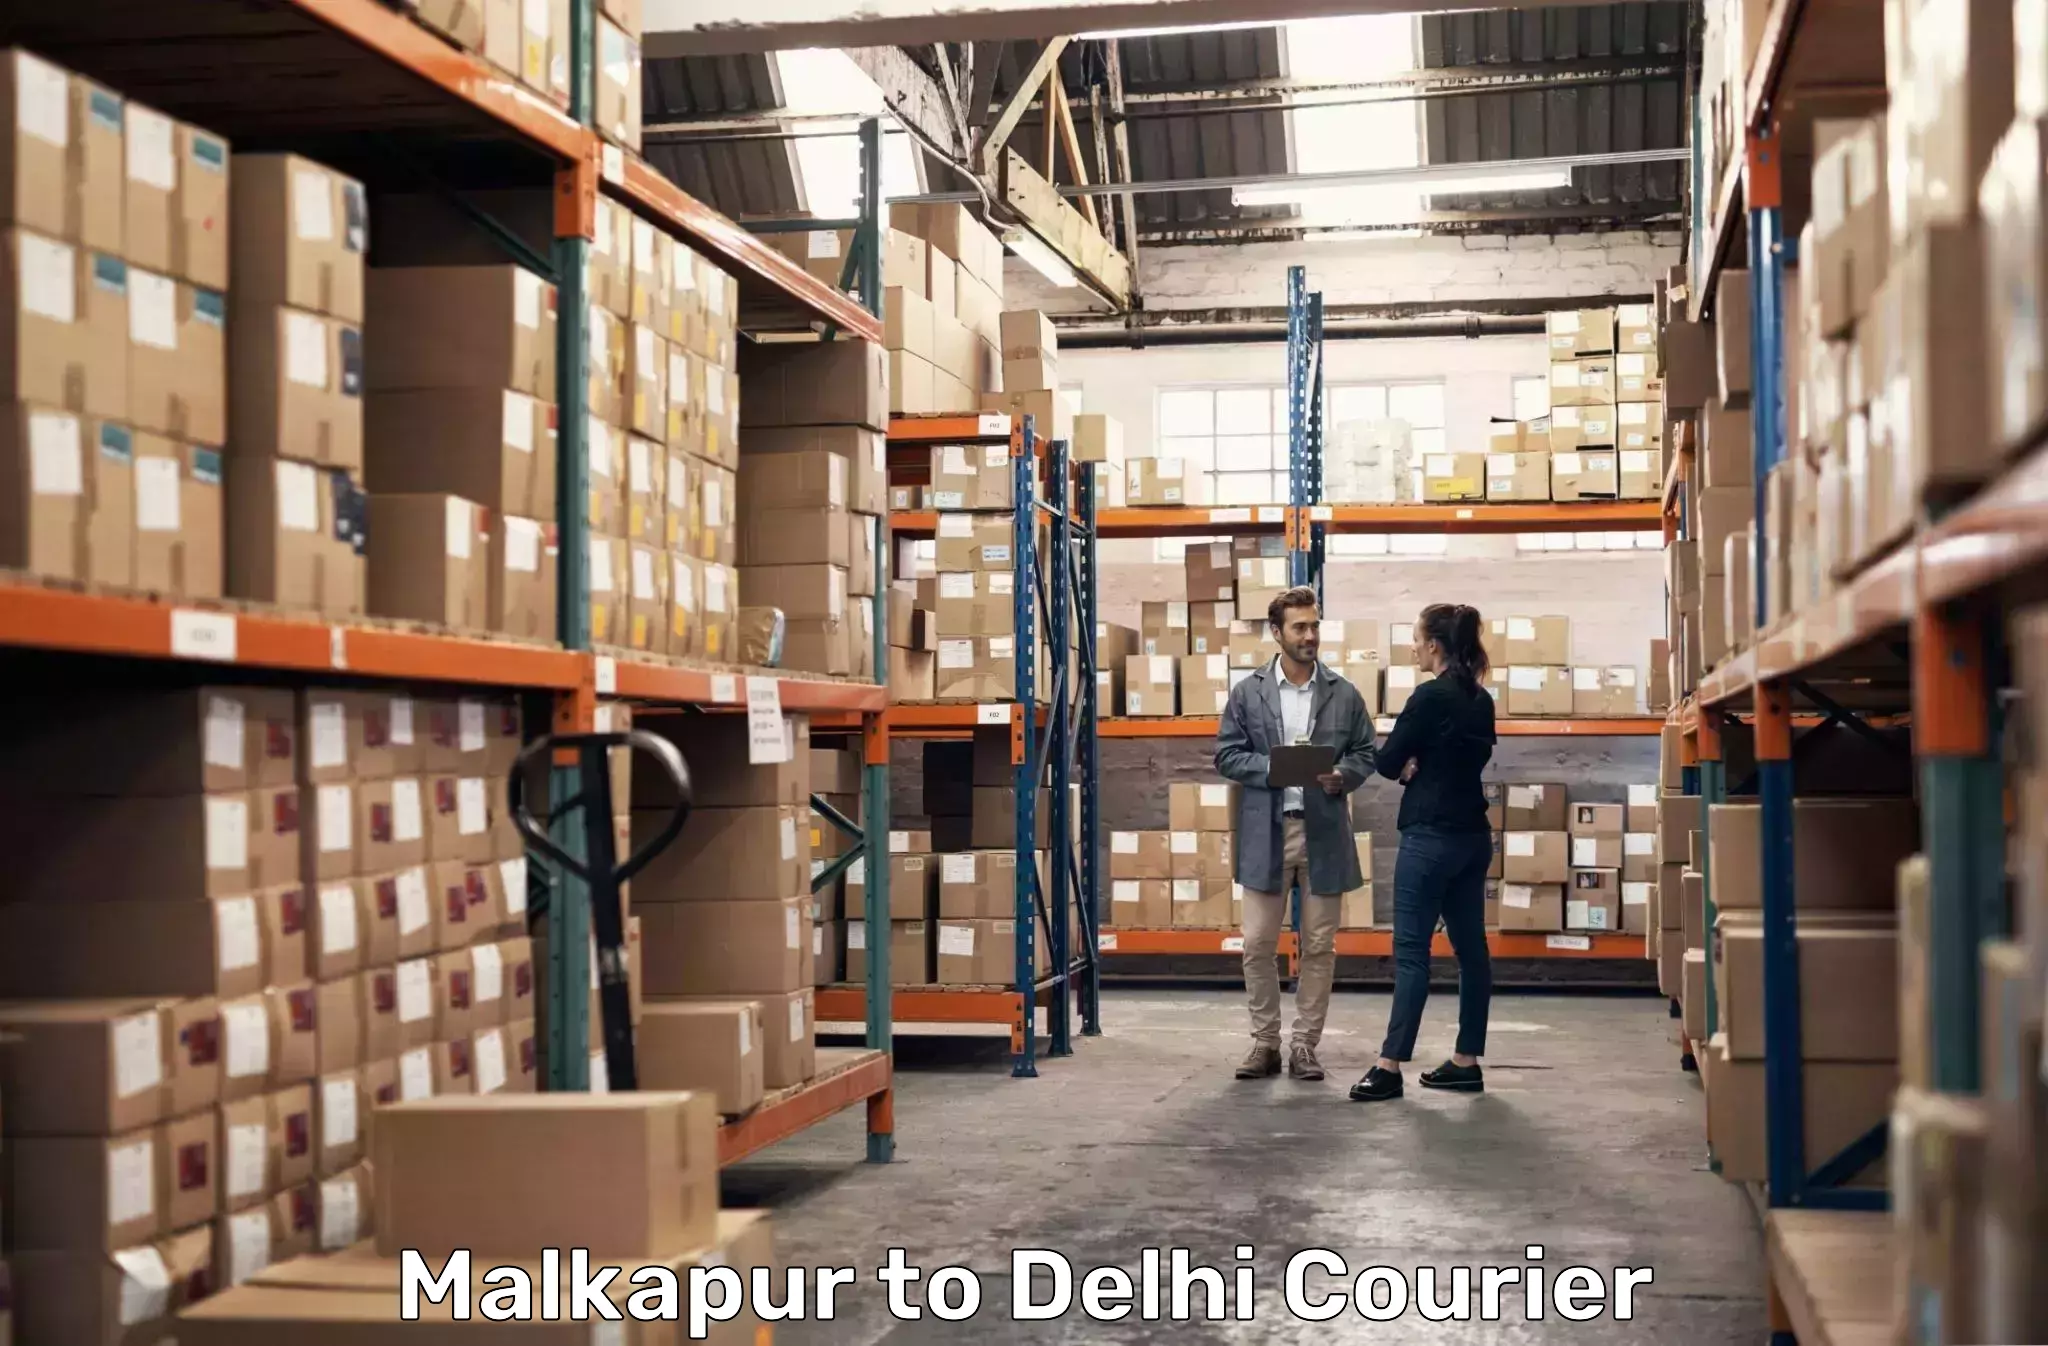 Express delivery solutions Malkapur to University of Delhi